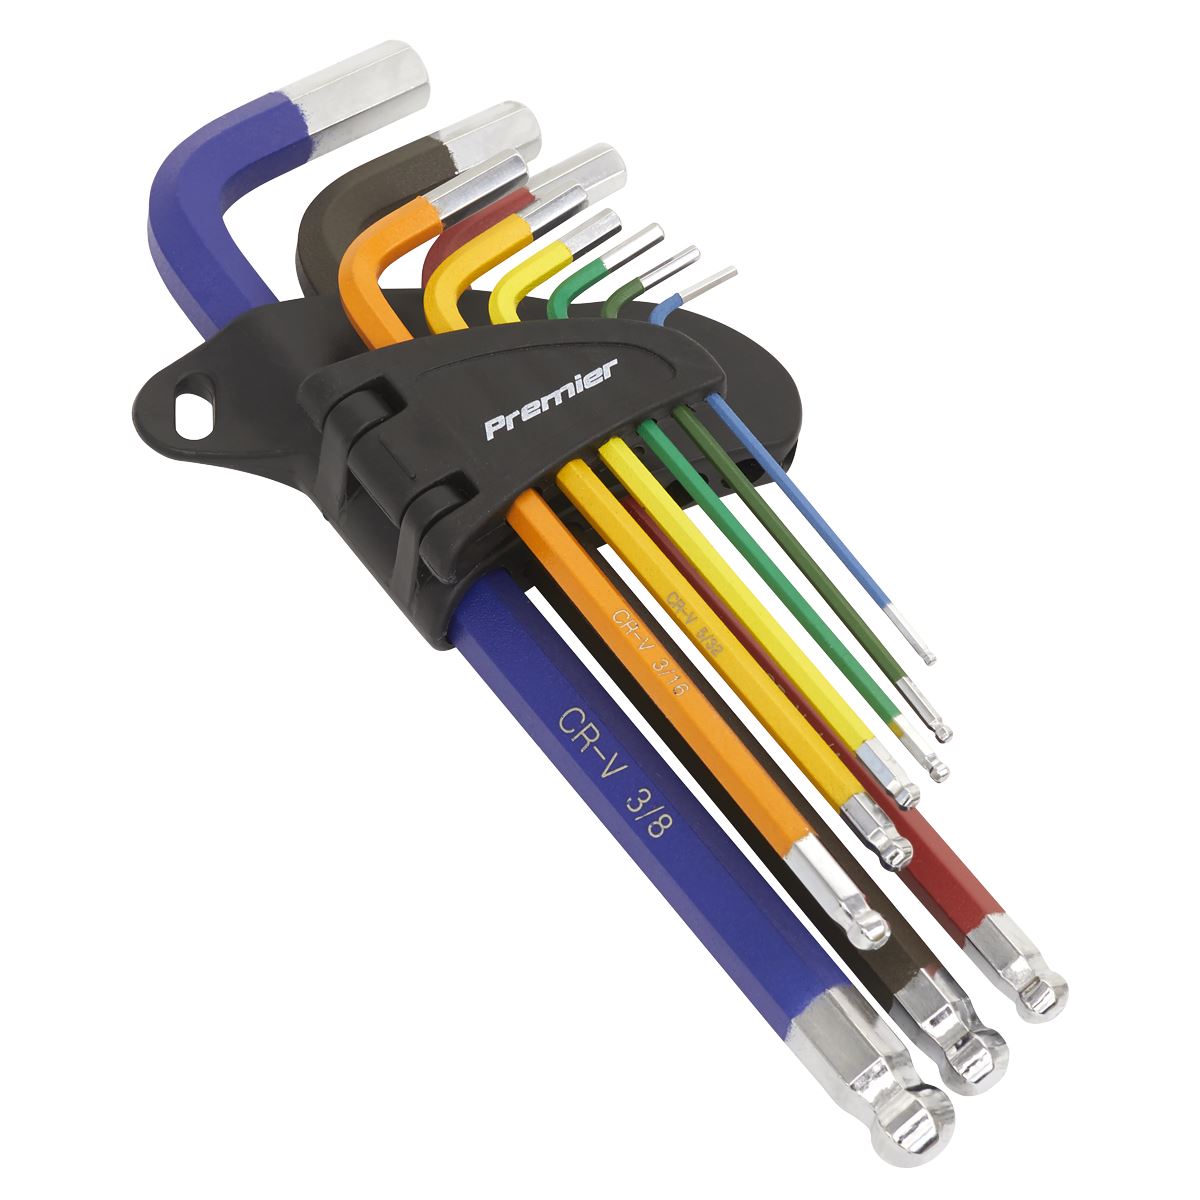 Sealey Premier Ball-End Hex Key Set 9pc Long Colour-Coded Imperial